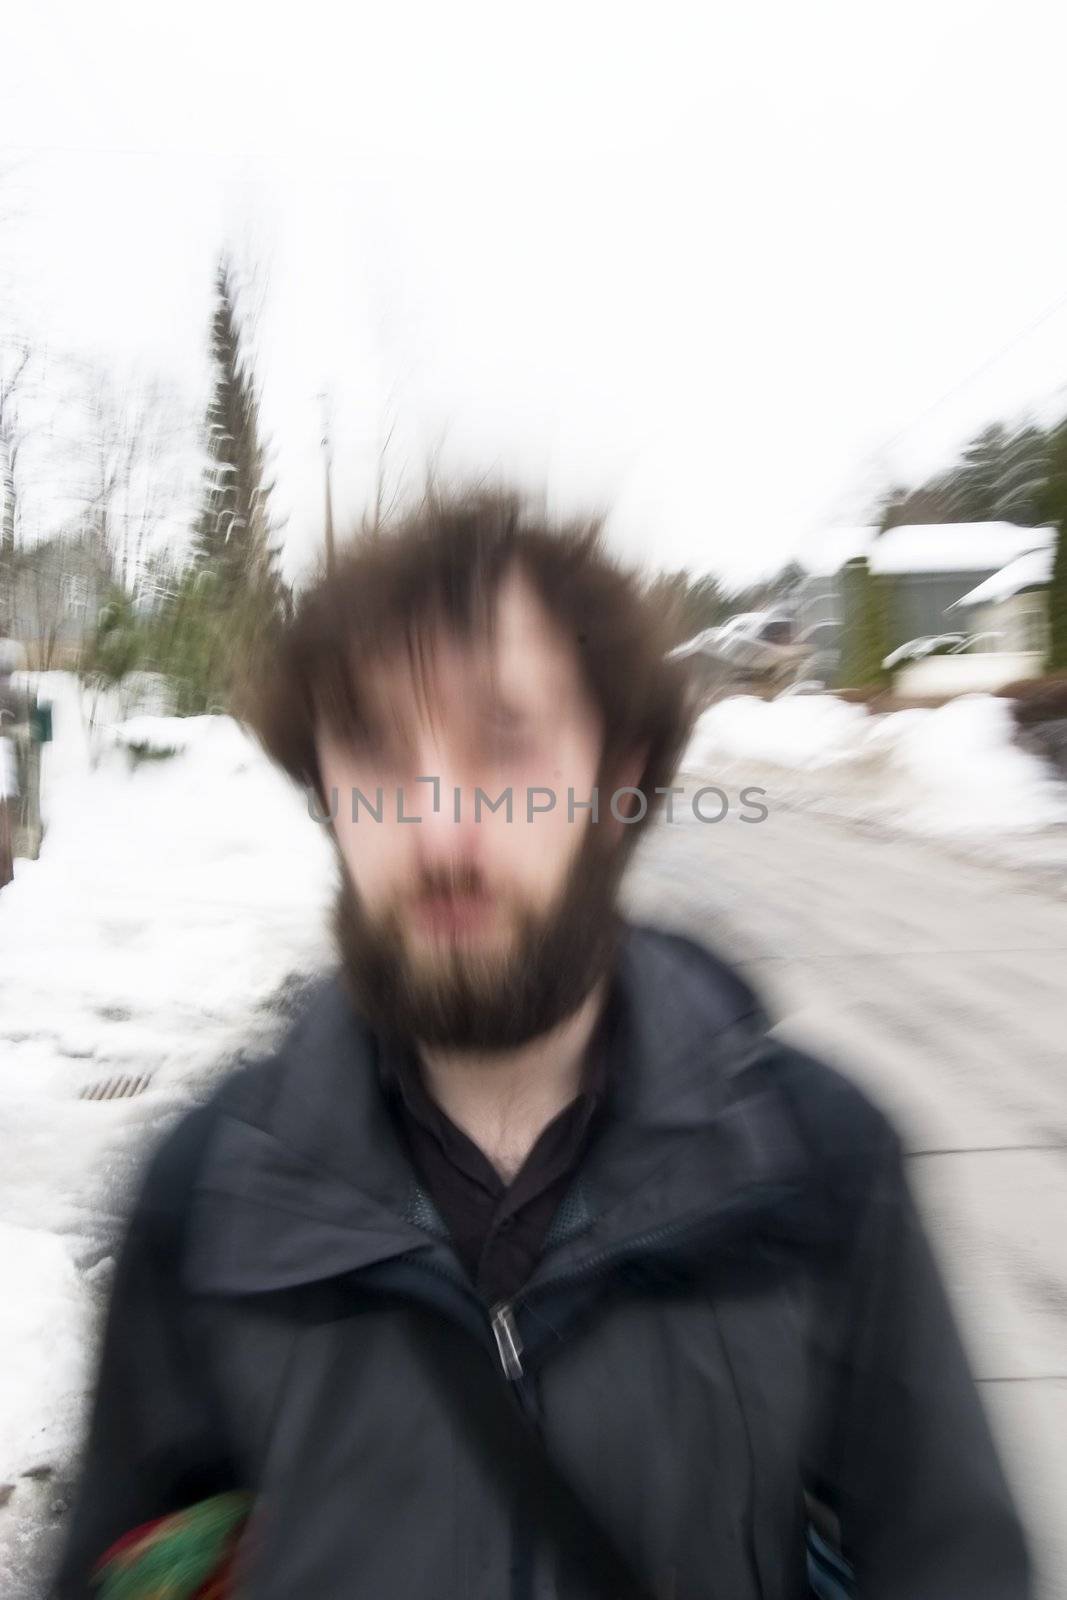 A motion blur abstract of a person walking in a hurry, a late stress rushing concept image.